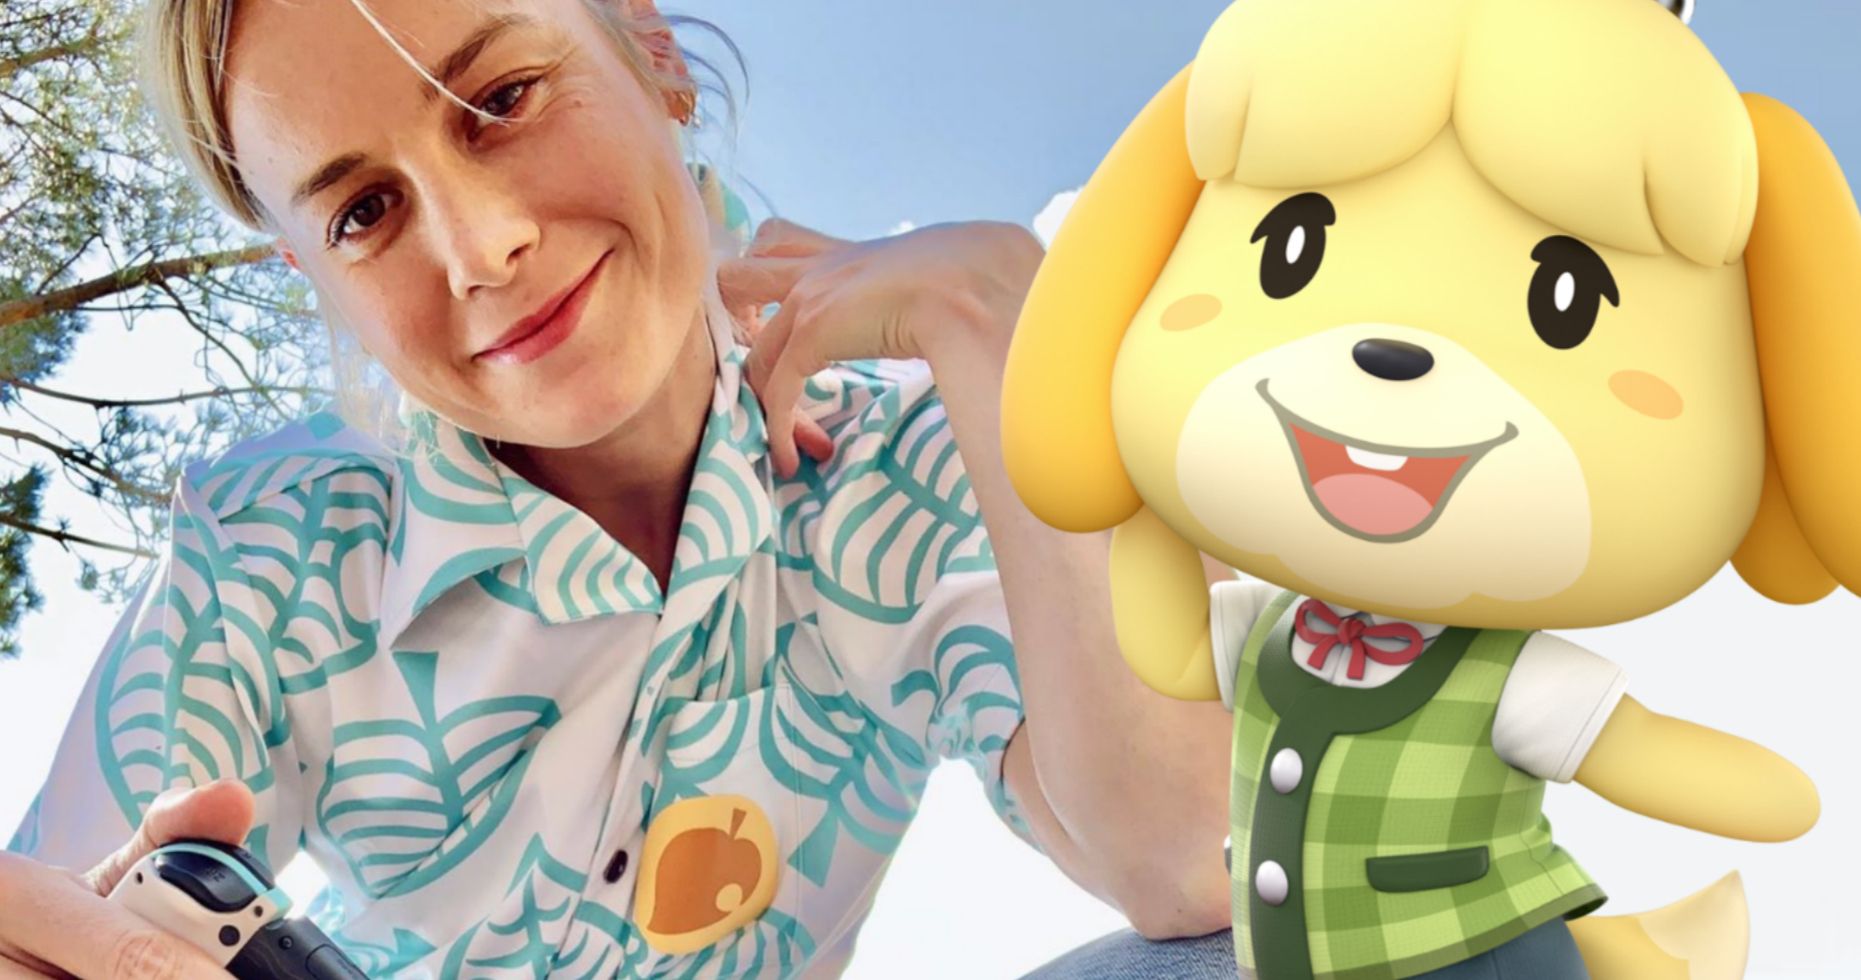 Brie Larson Loves the Animal Crossing Video Game So Much She Wants to Star in the Movie